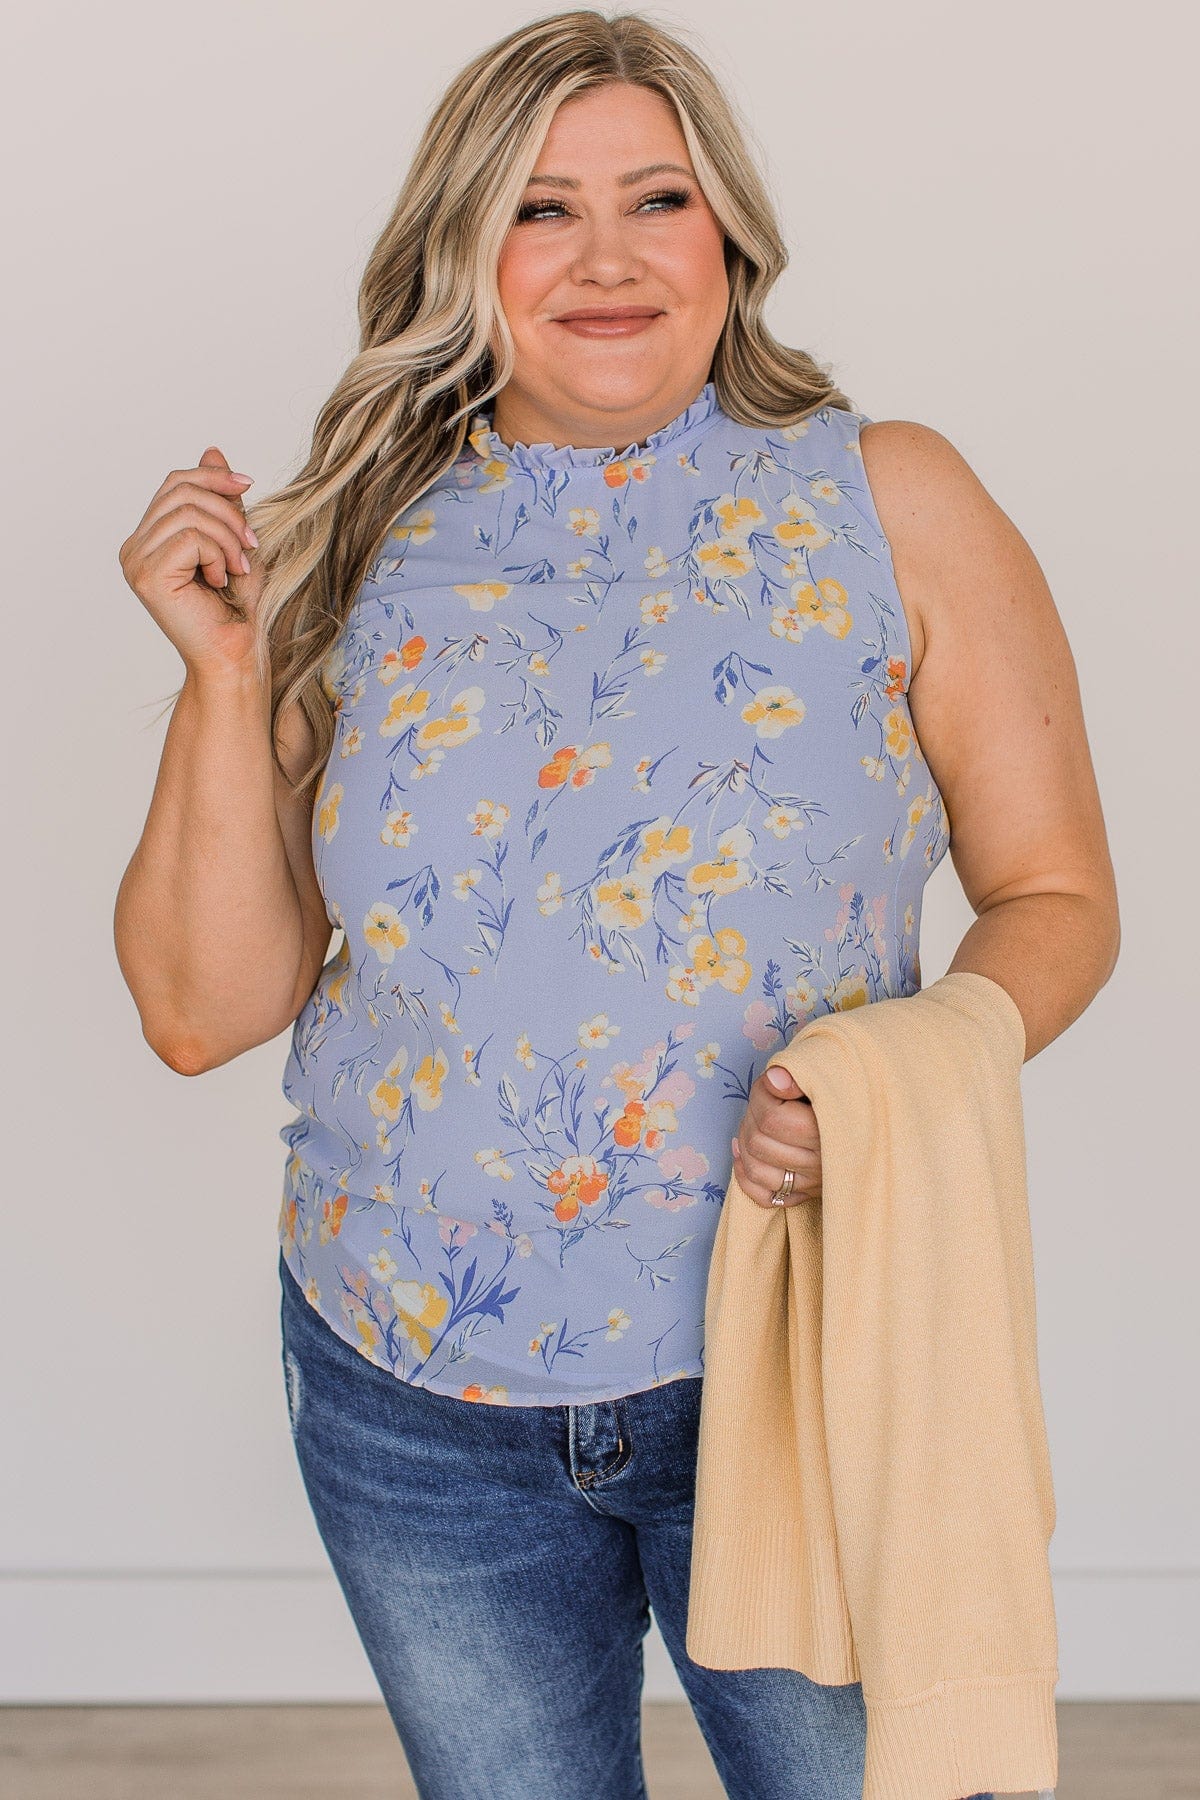 Seek You Out Floral Sleeveless Blouse- Blue